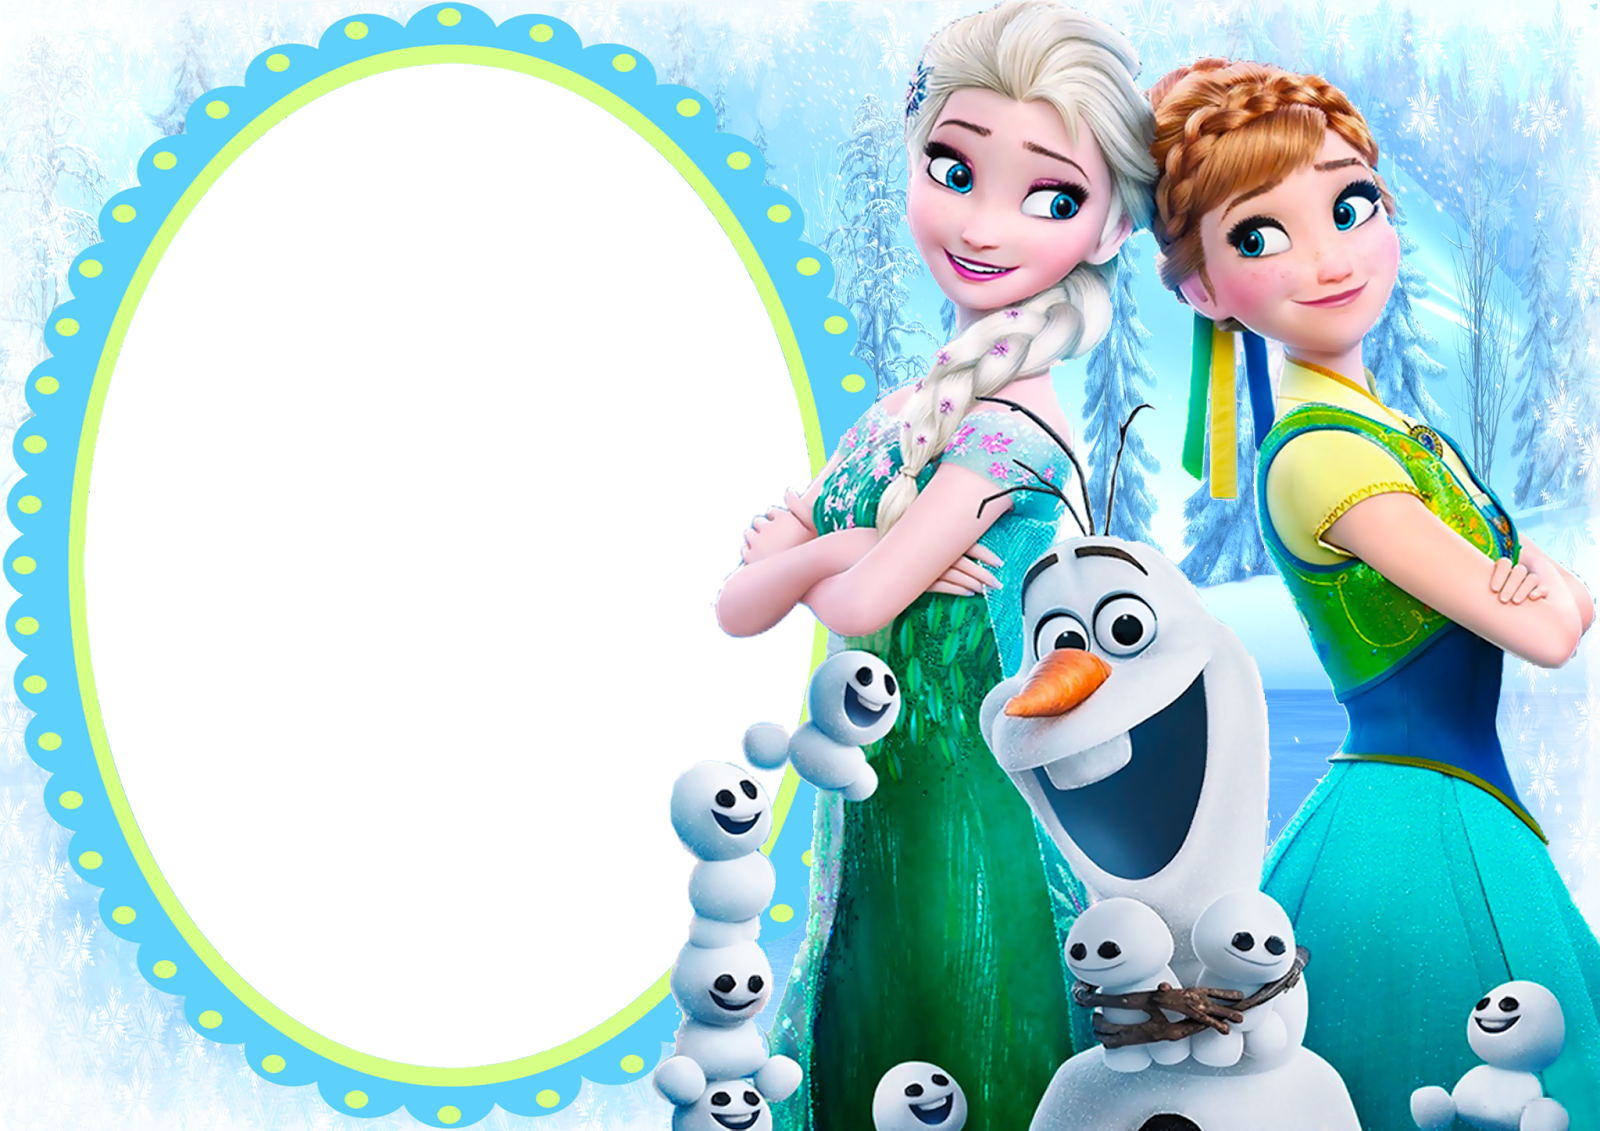 Frozen Frame Wallpapers High Quality | Download Free